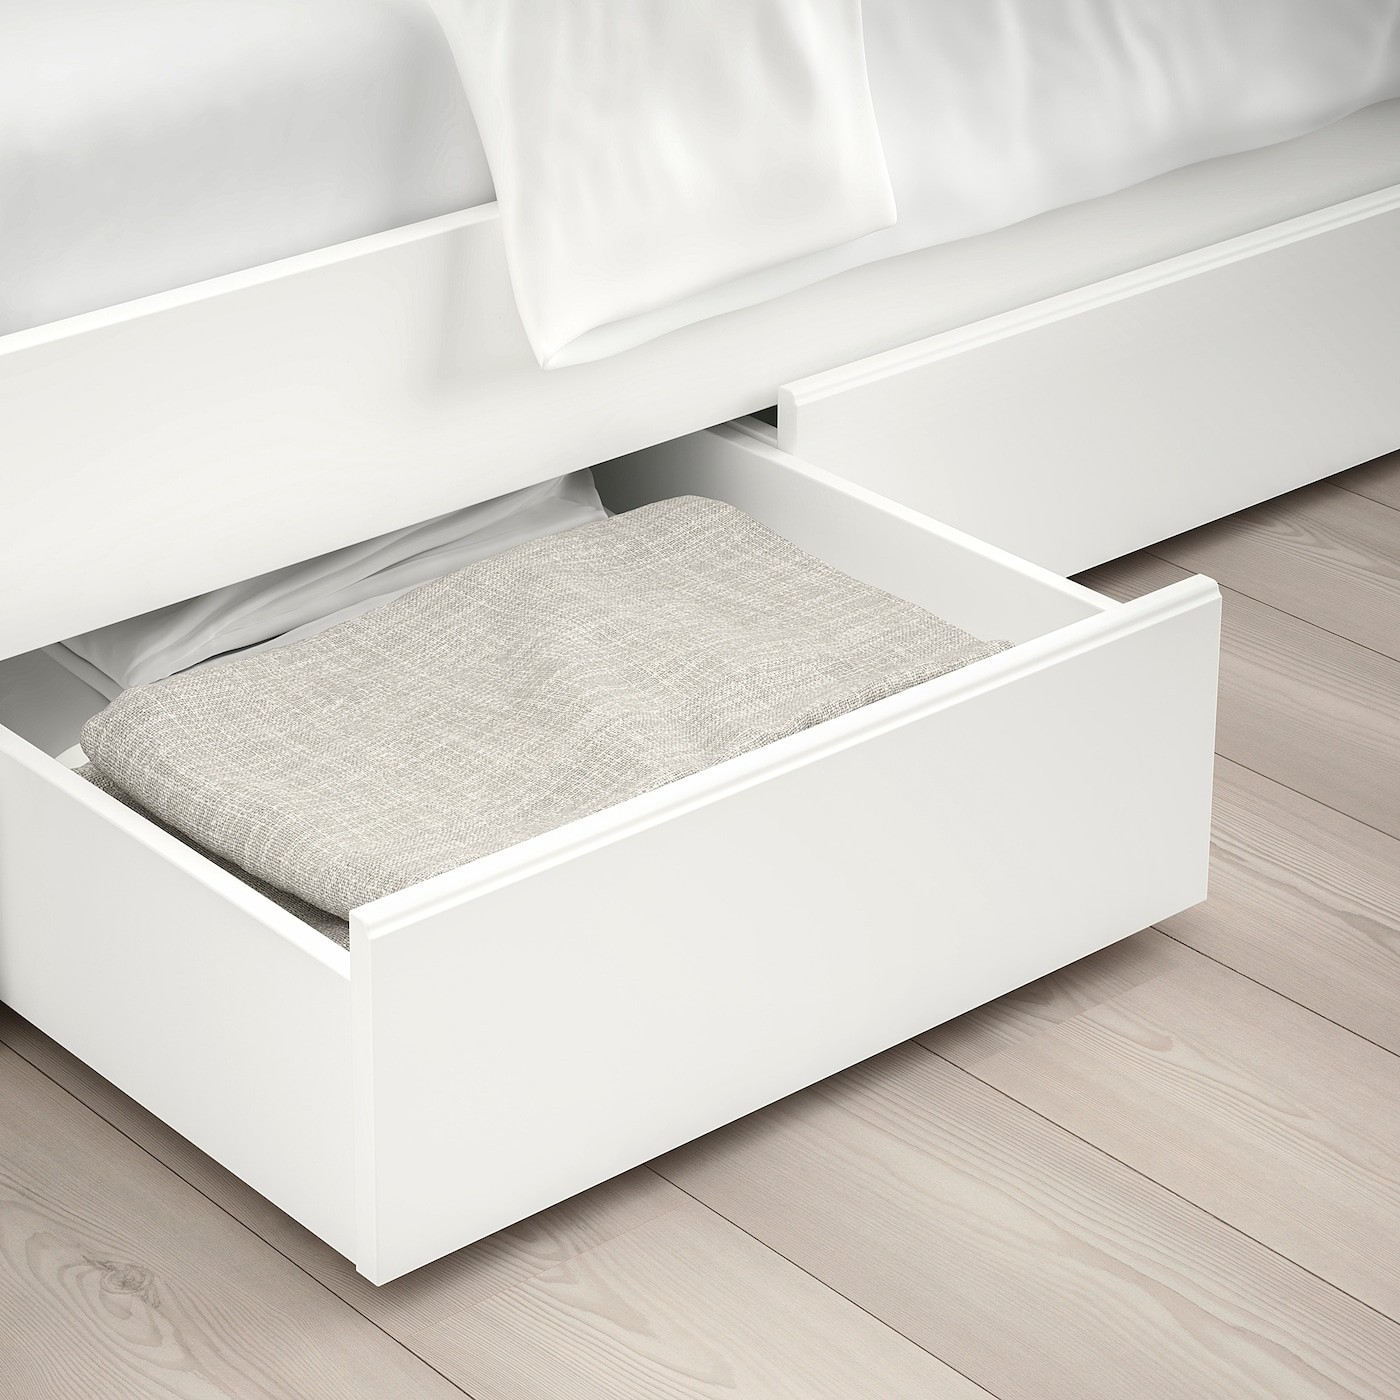 SONGESAND Bed frame with 4 storage boxes